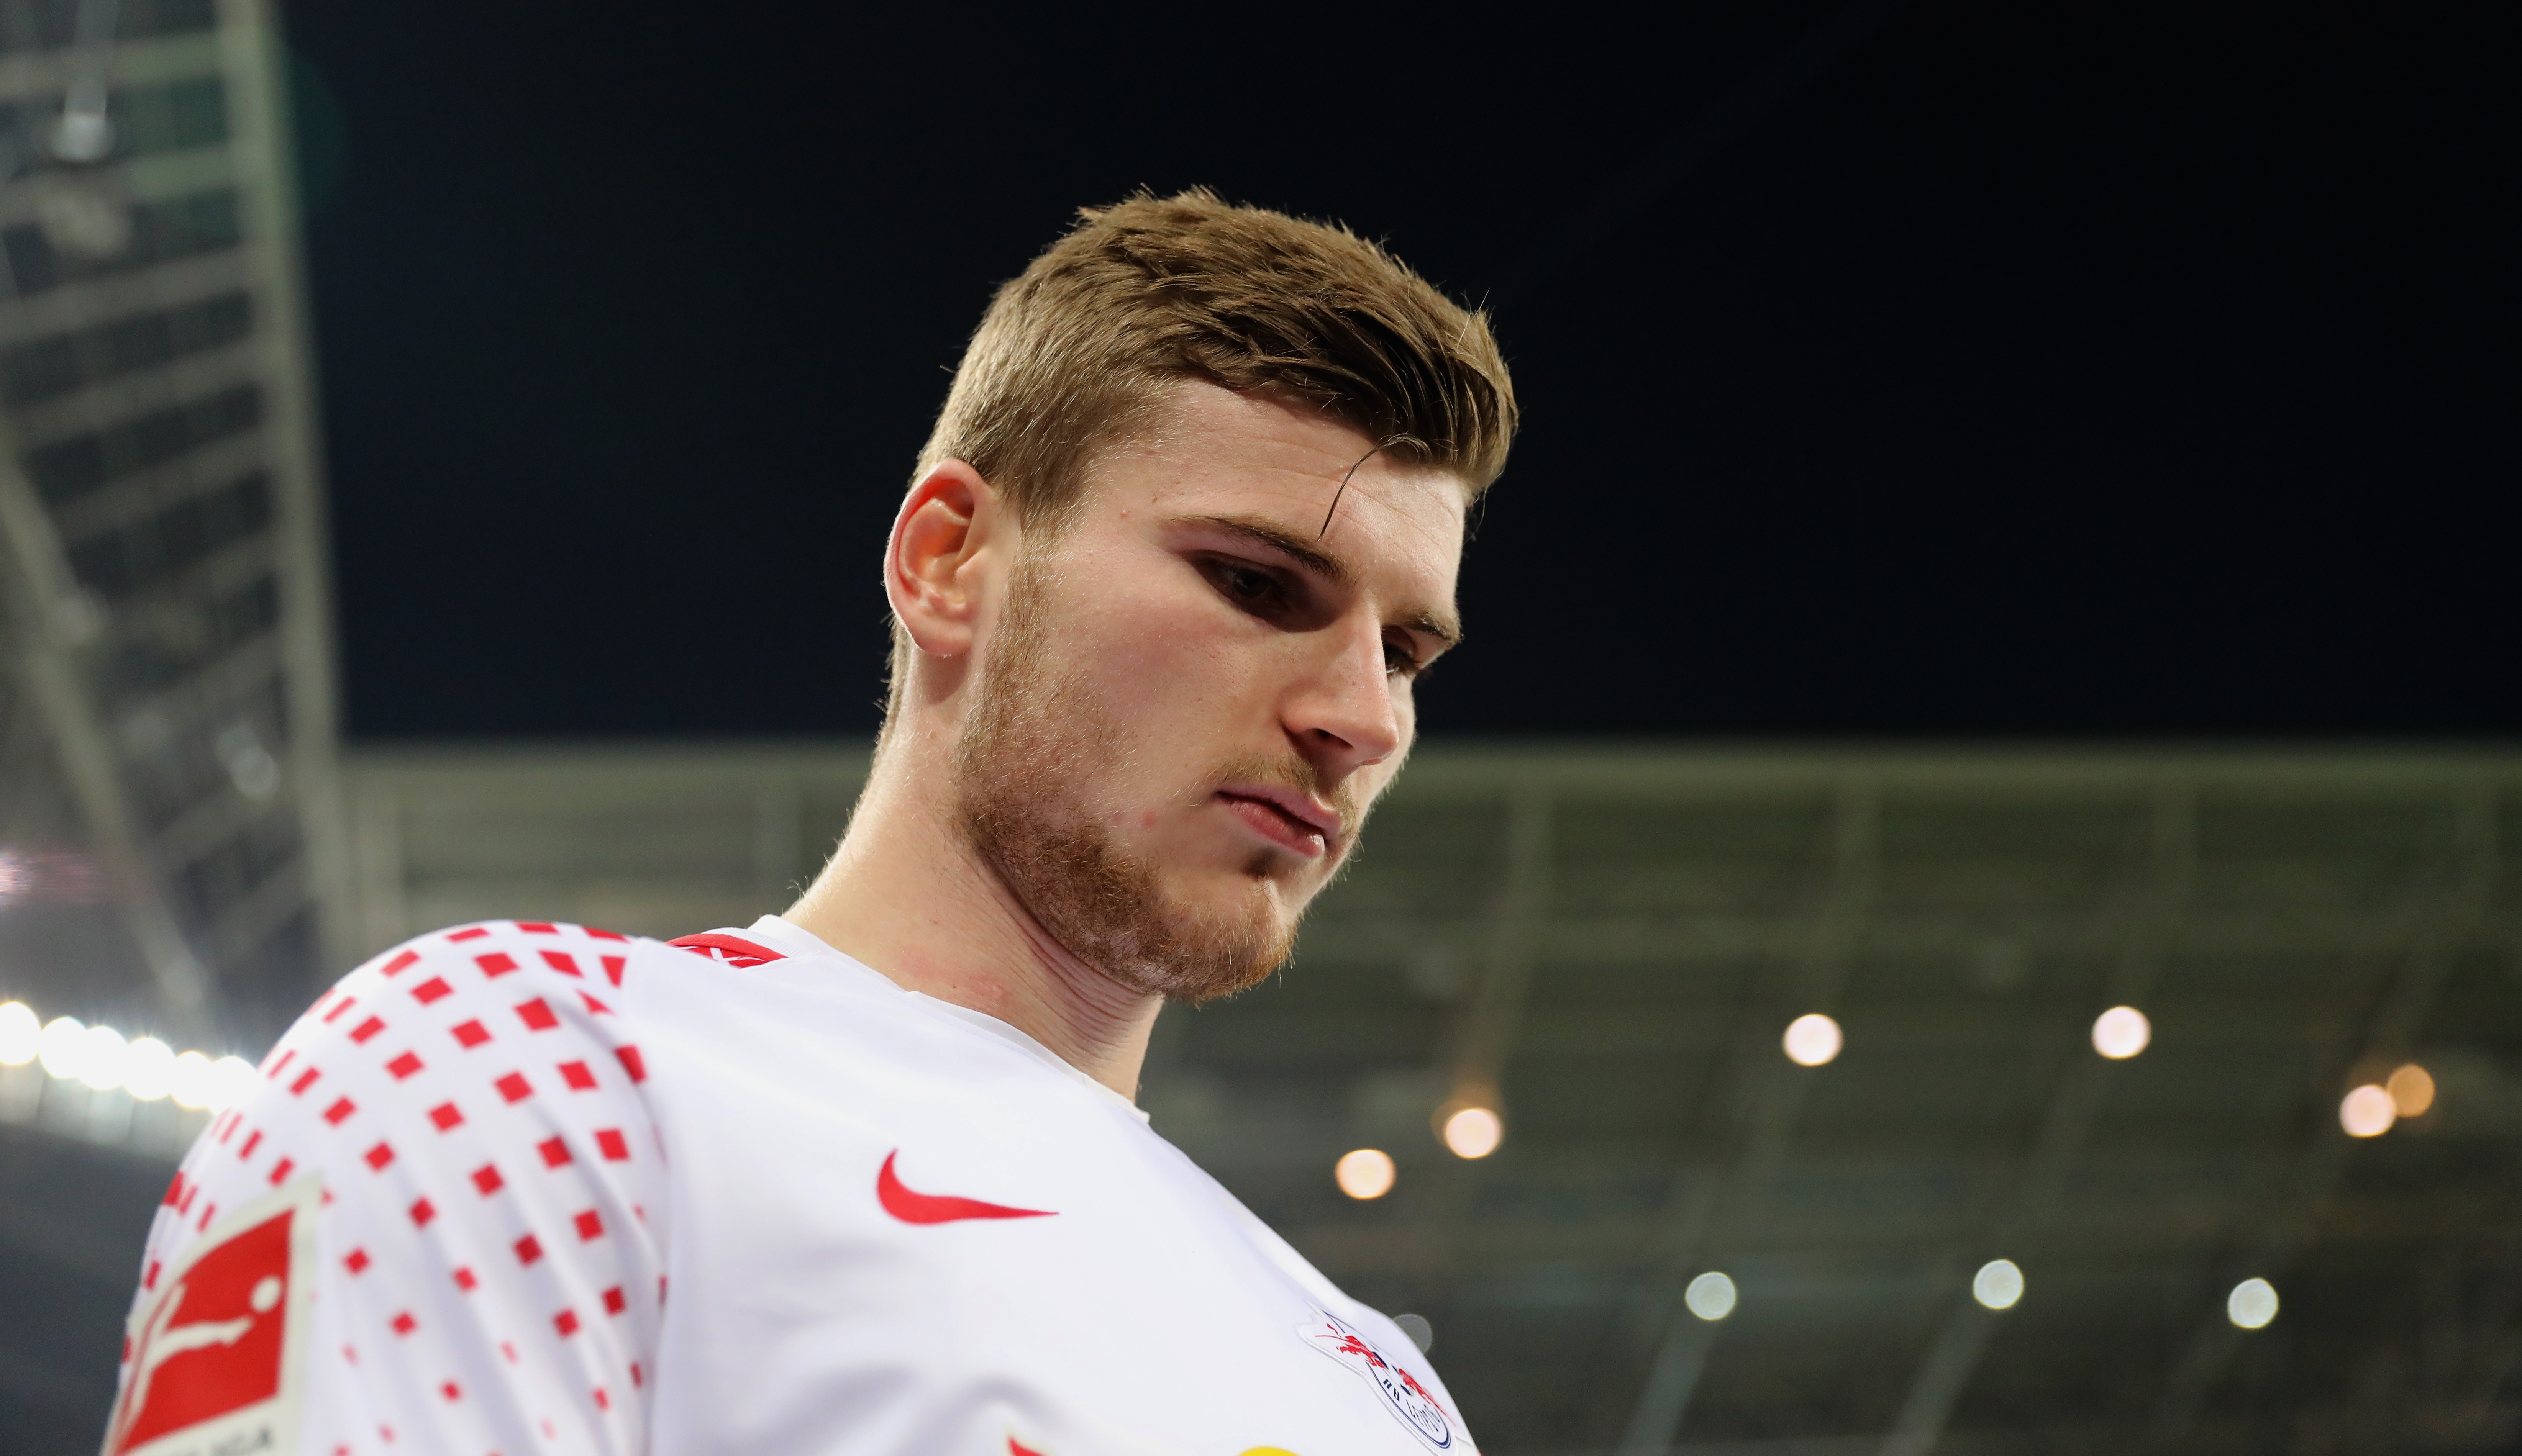 LEIPZIG, GERMANY - MARCH 03:  Timo Werner of RB Leipzig walks on the pitch during the Bundesliga match between RB Leipzig and Borussia Dortmund at Red Bull Arena on March 3, 2018 in Leipzig, Germany.  (Photo by Boris Streubel/Bongarts/Getty Images)